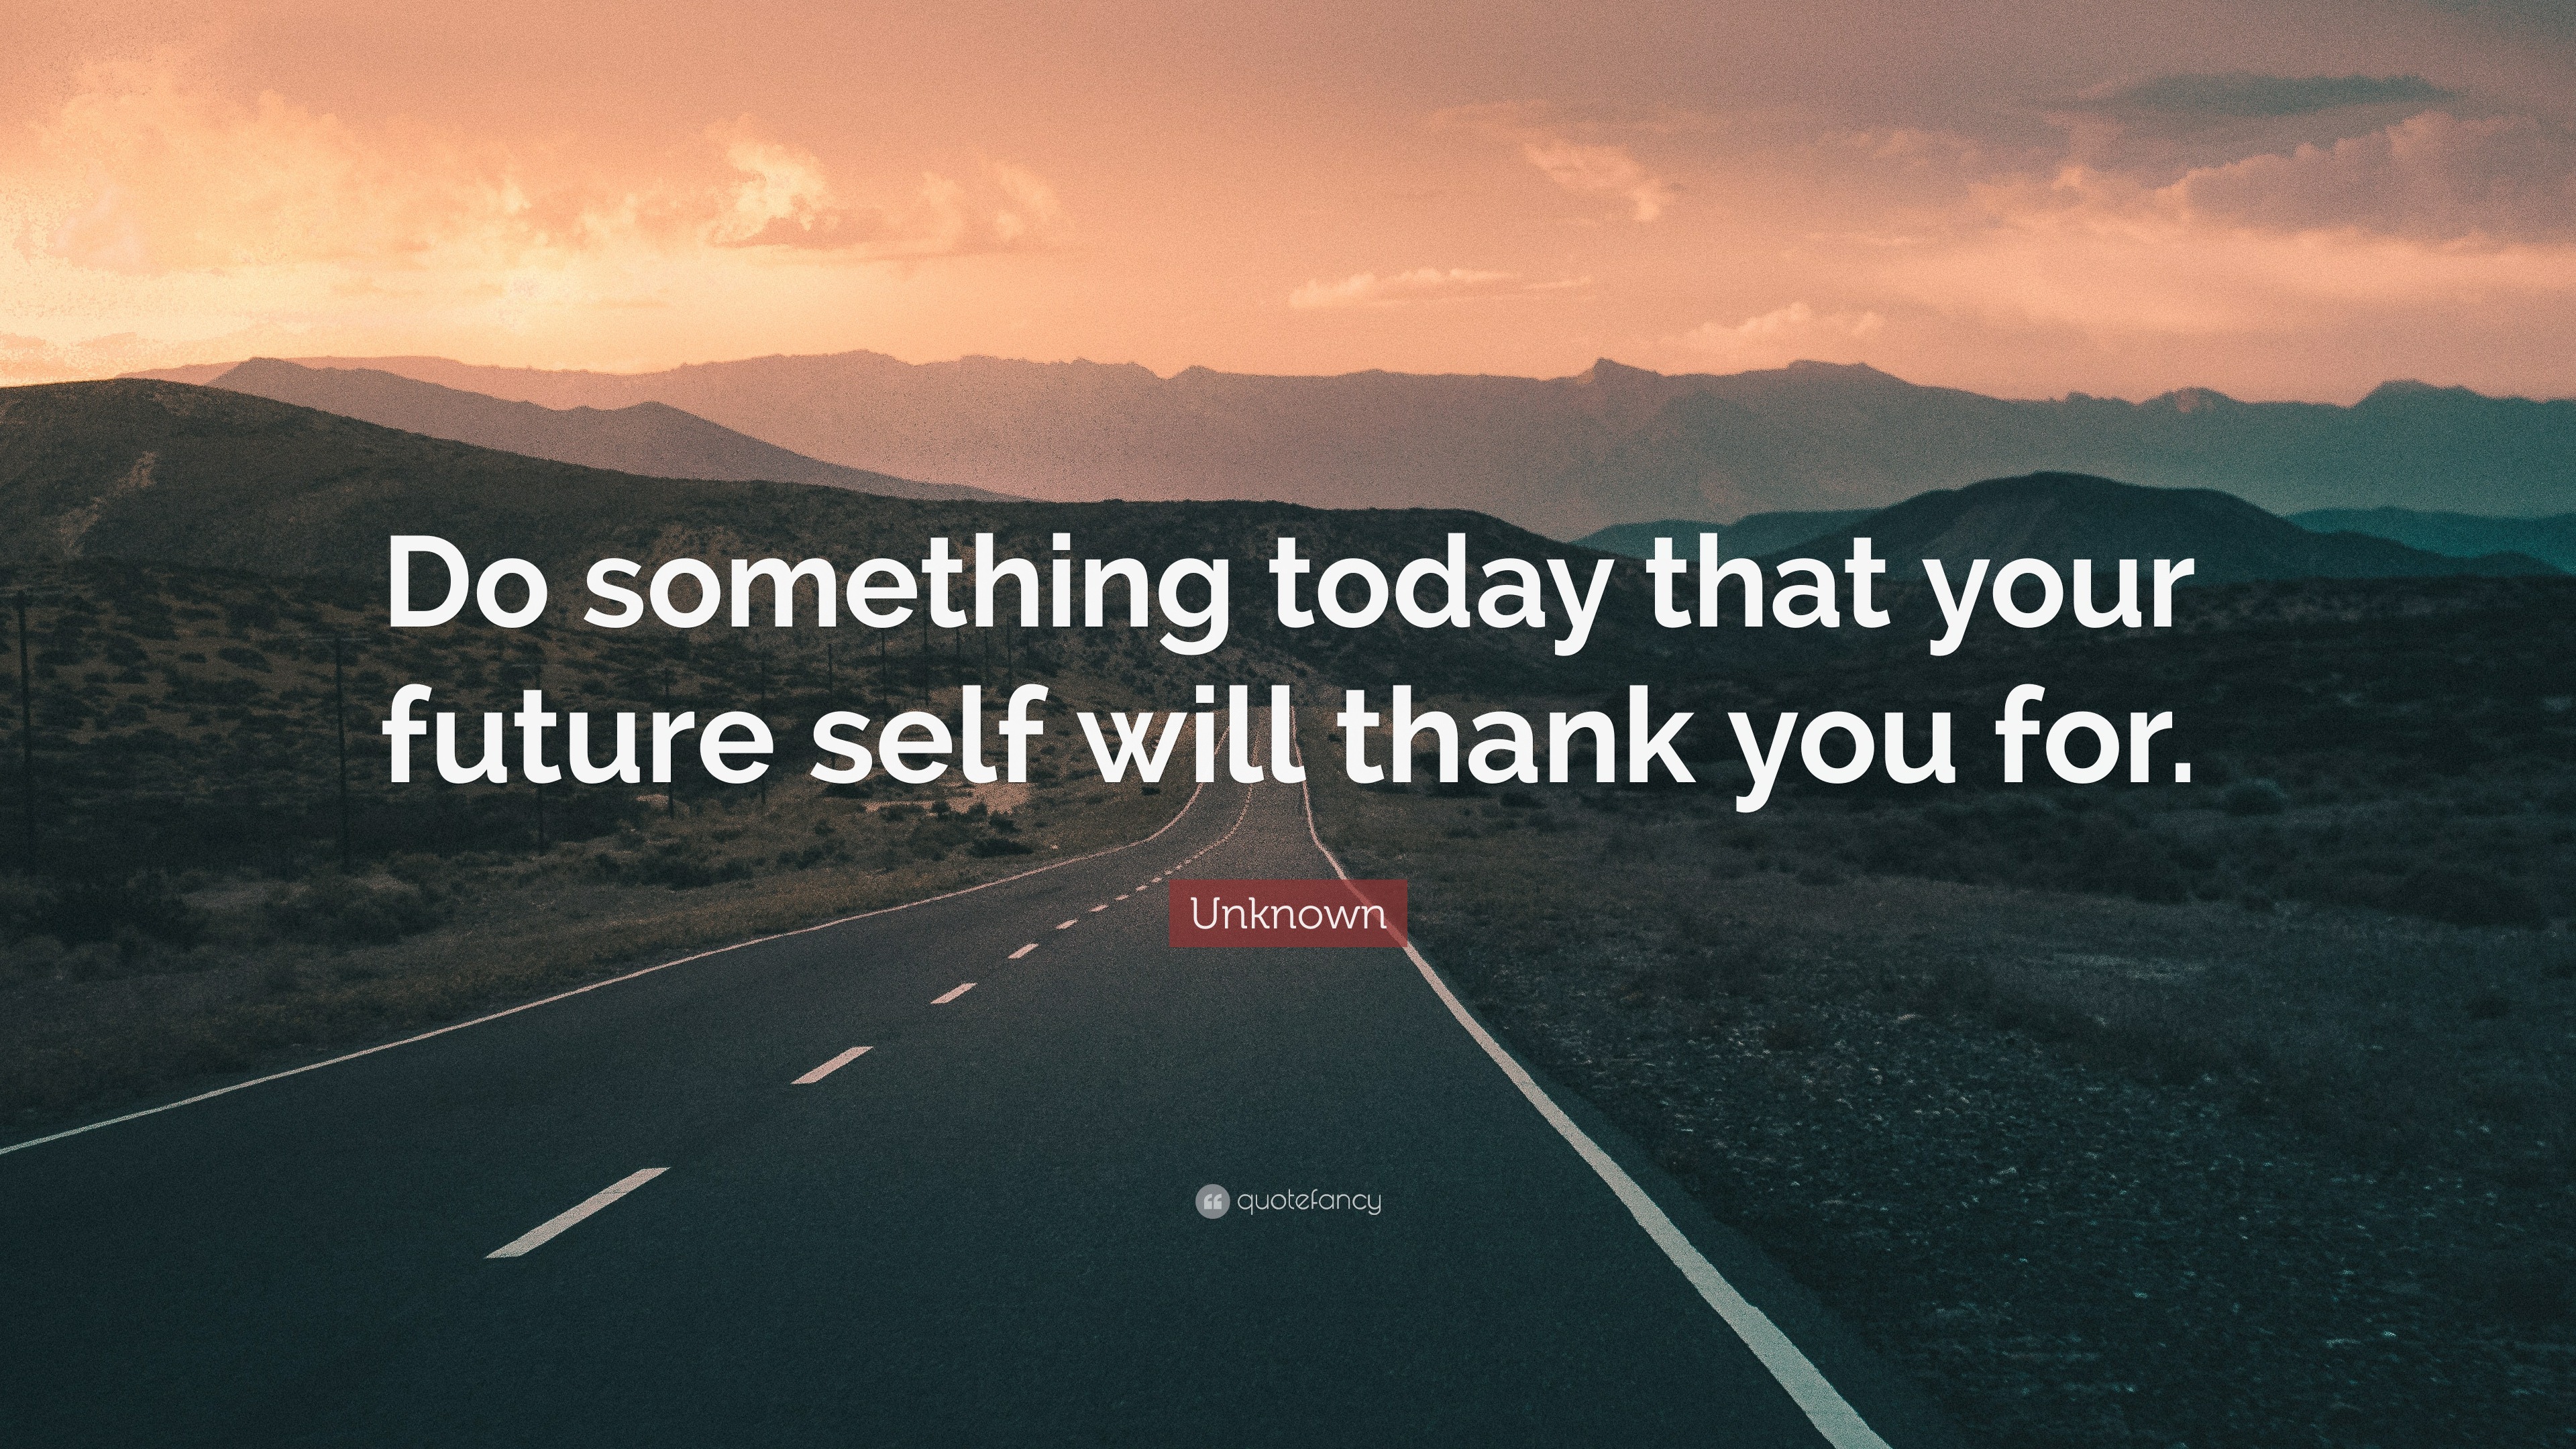 Quote Magnet Do something today that your future self will t. Quote Magnet Do...